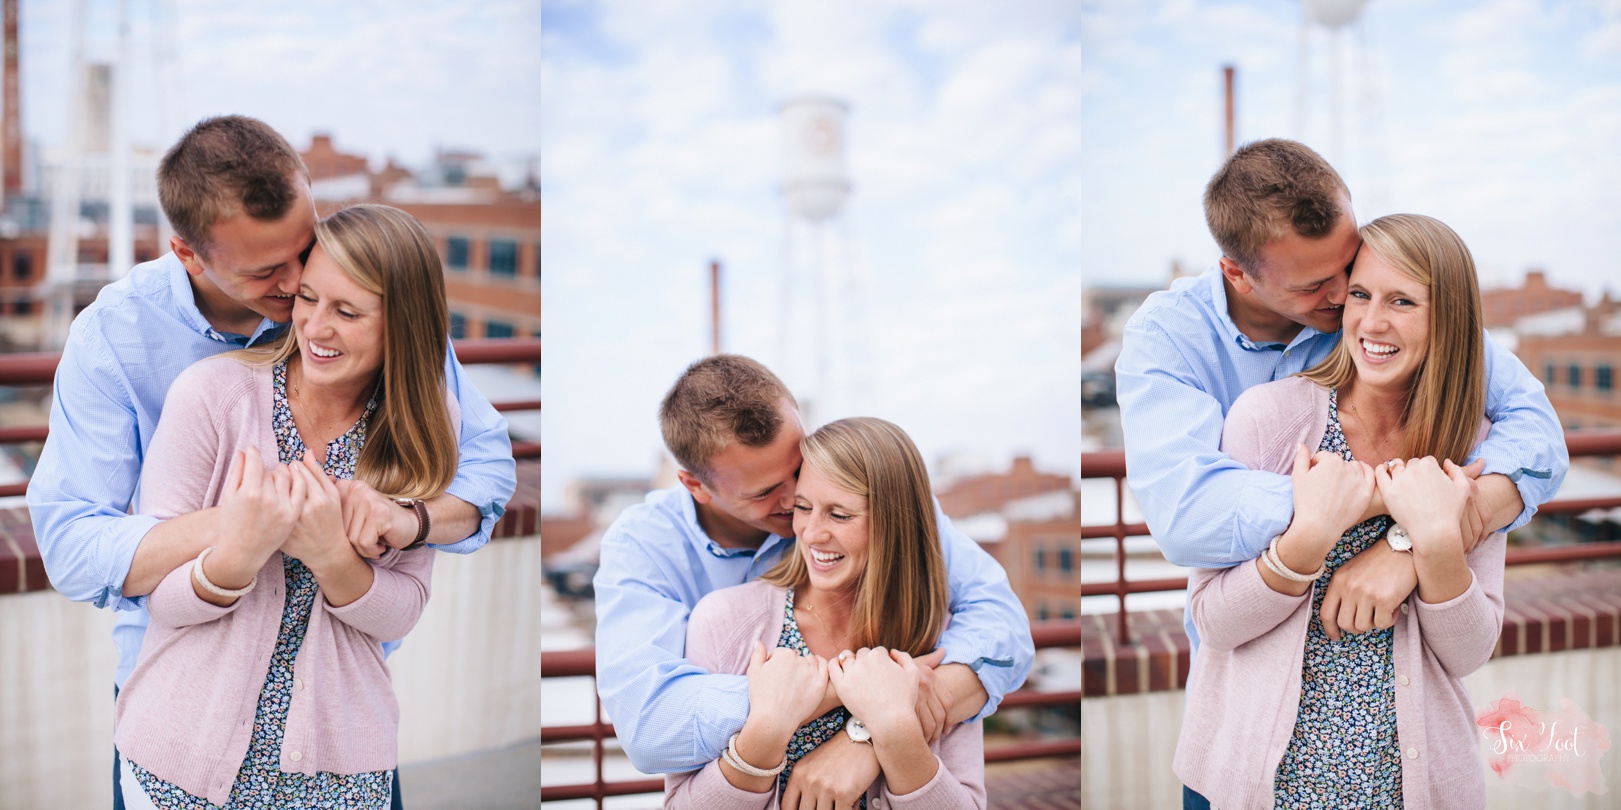 tobacoo district engagement photo